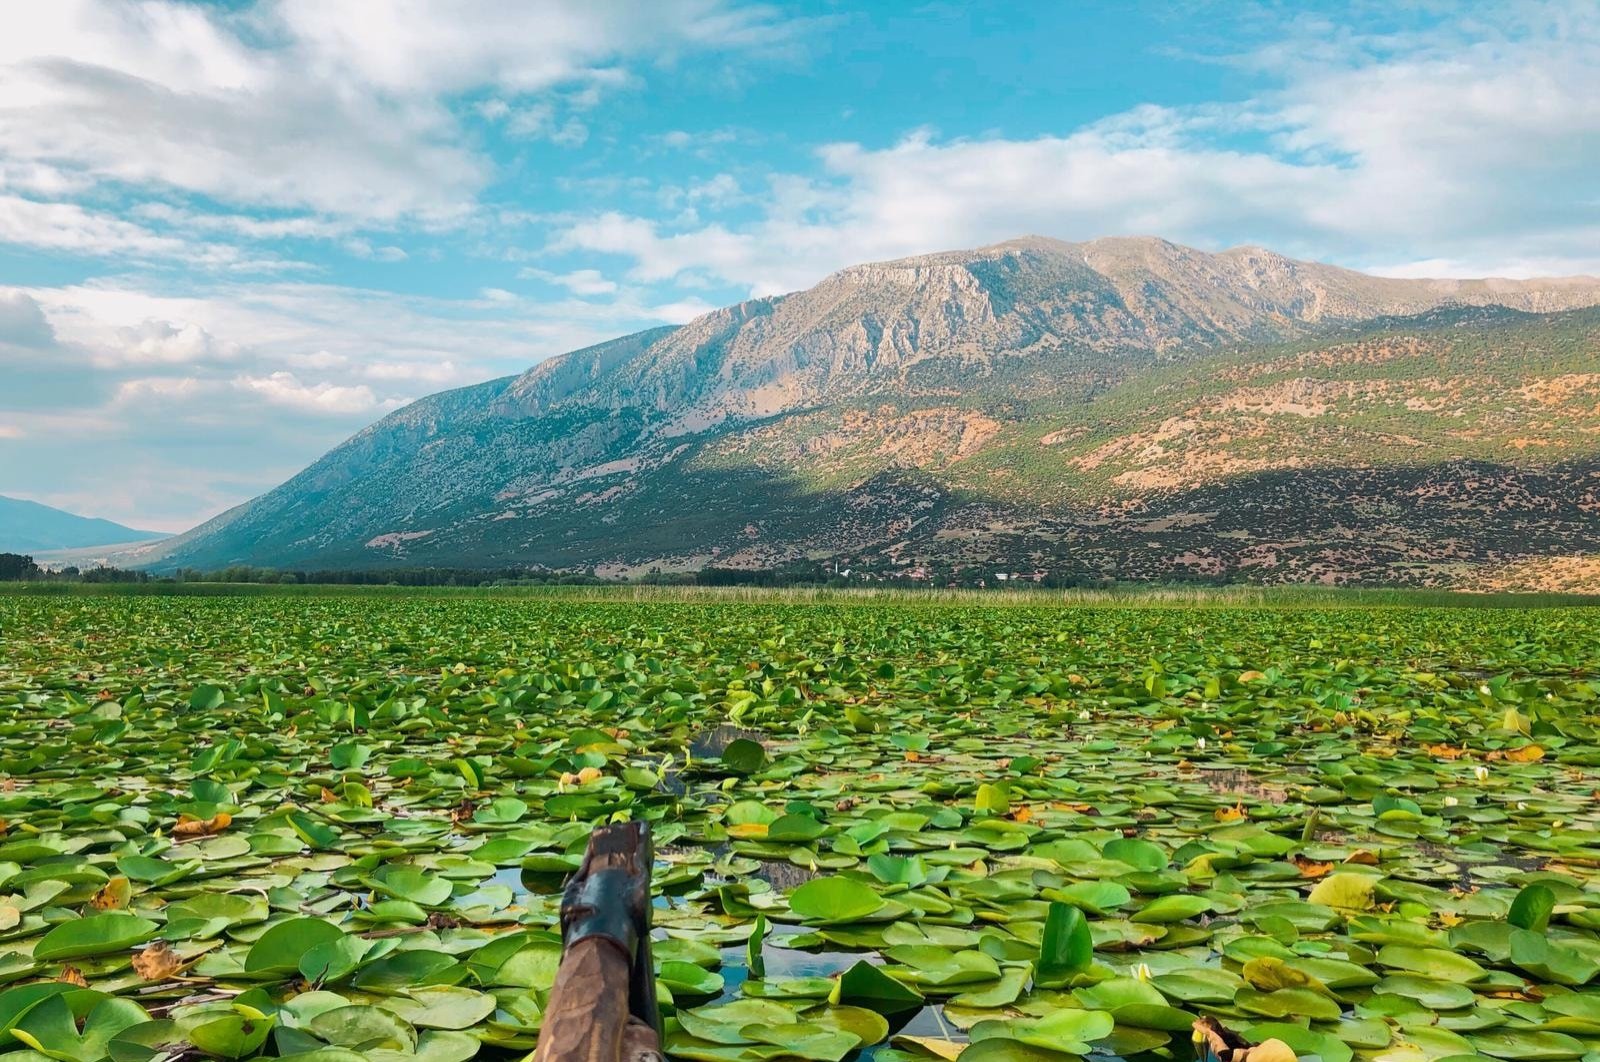 Covered in water lilies, Lake Işıklı is the perfect summer getaway for a calm weekend in nature. (AA Photo)